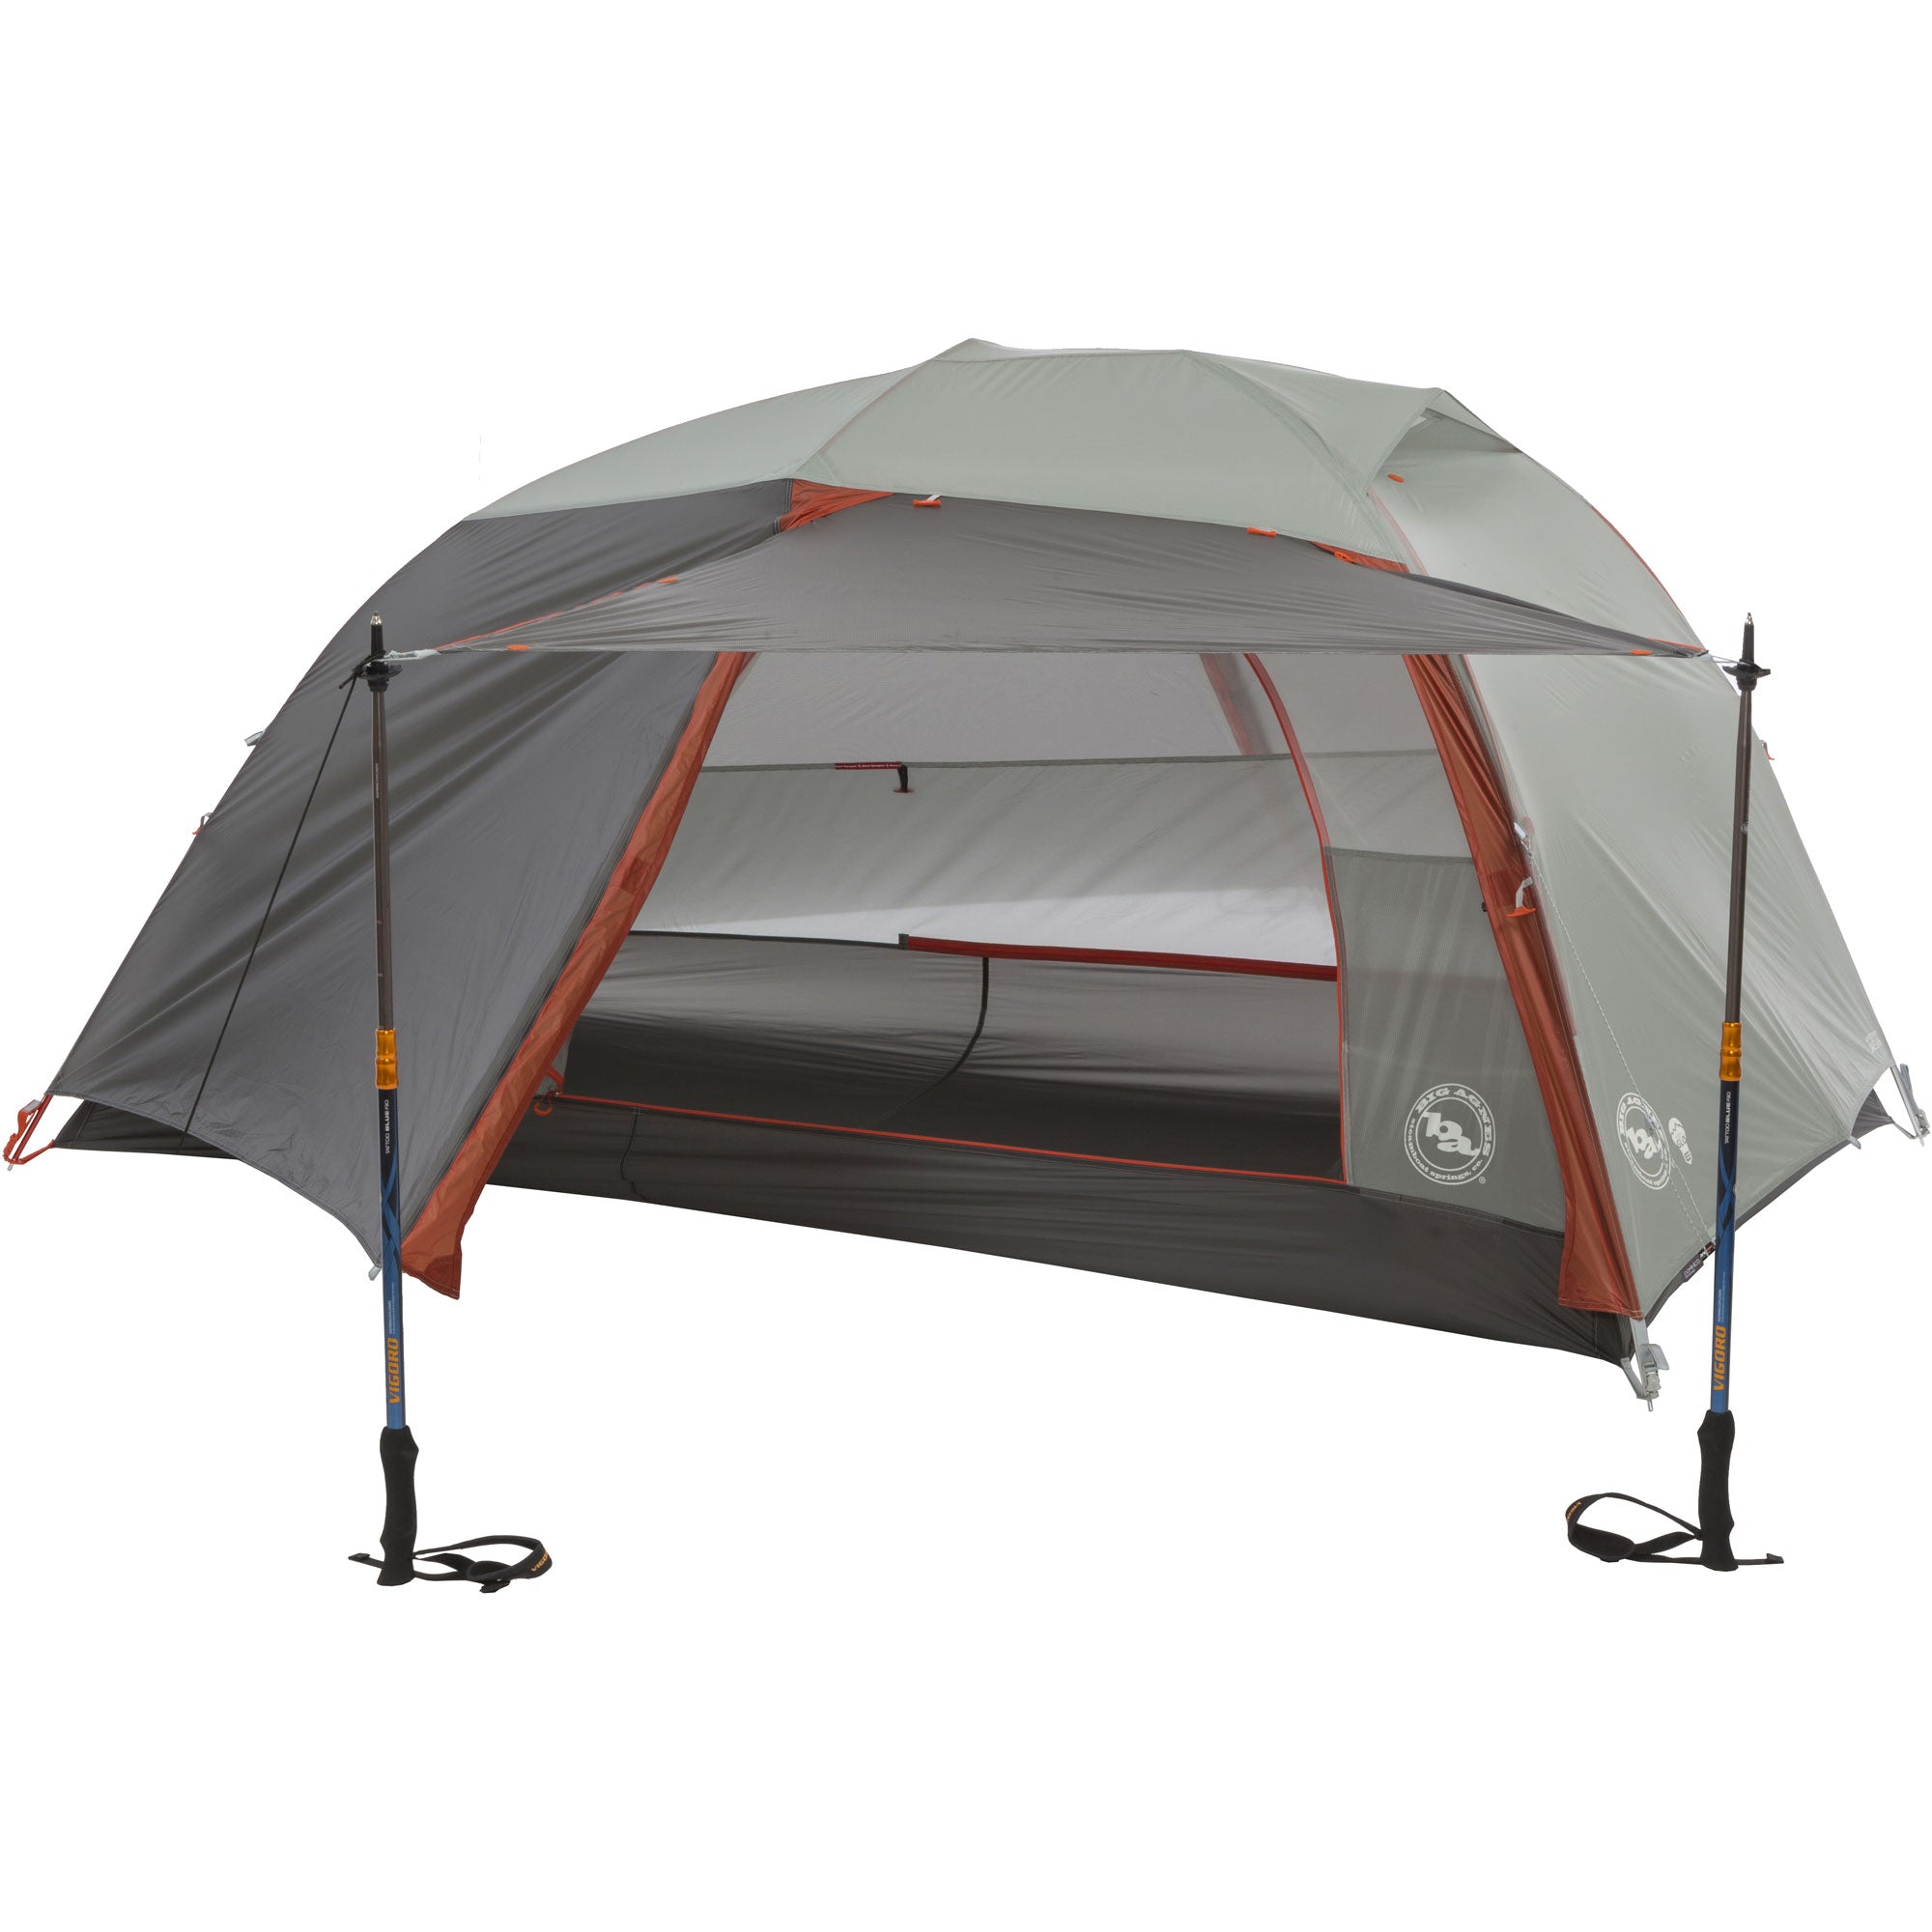 Big Agnes Copper Spur HV UL mtnGLO 2 Person Backpacking Tent